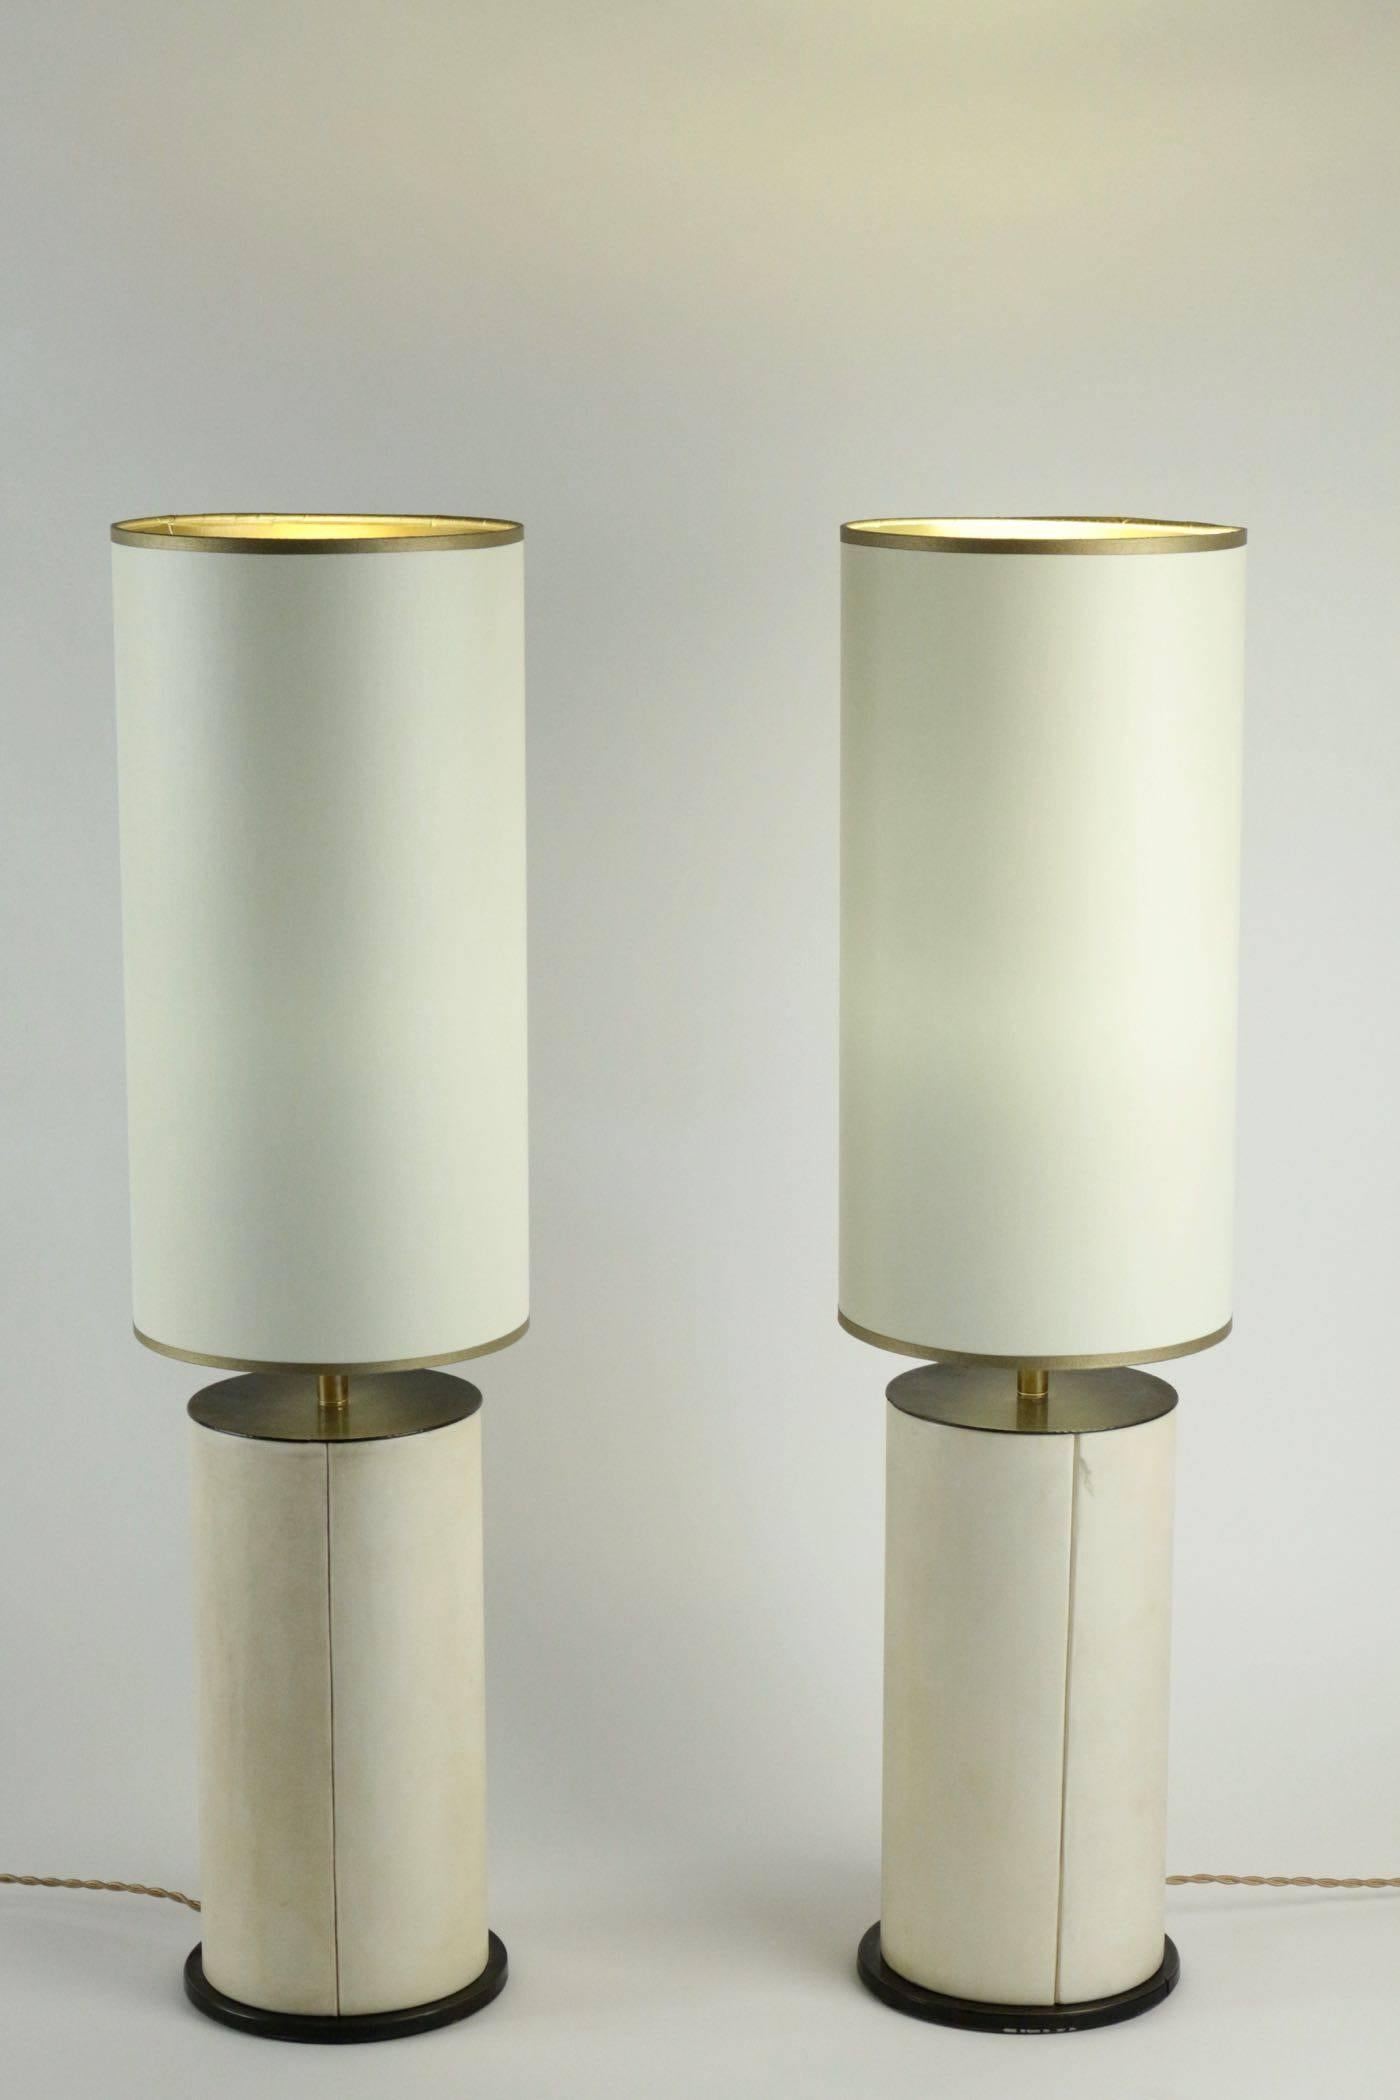 Pair of lamps in parchment and bronze, circa 1940.
 